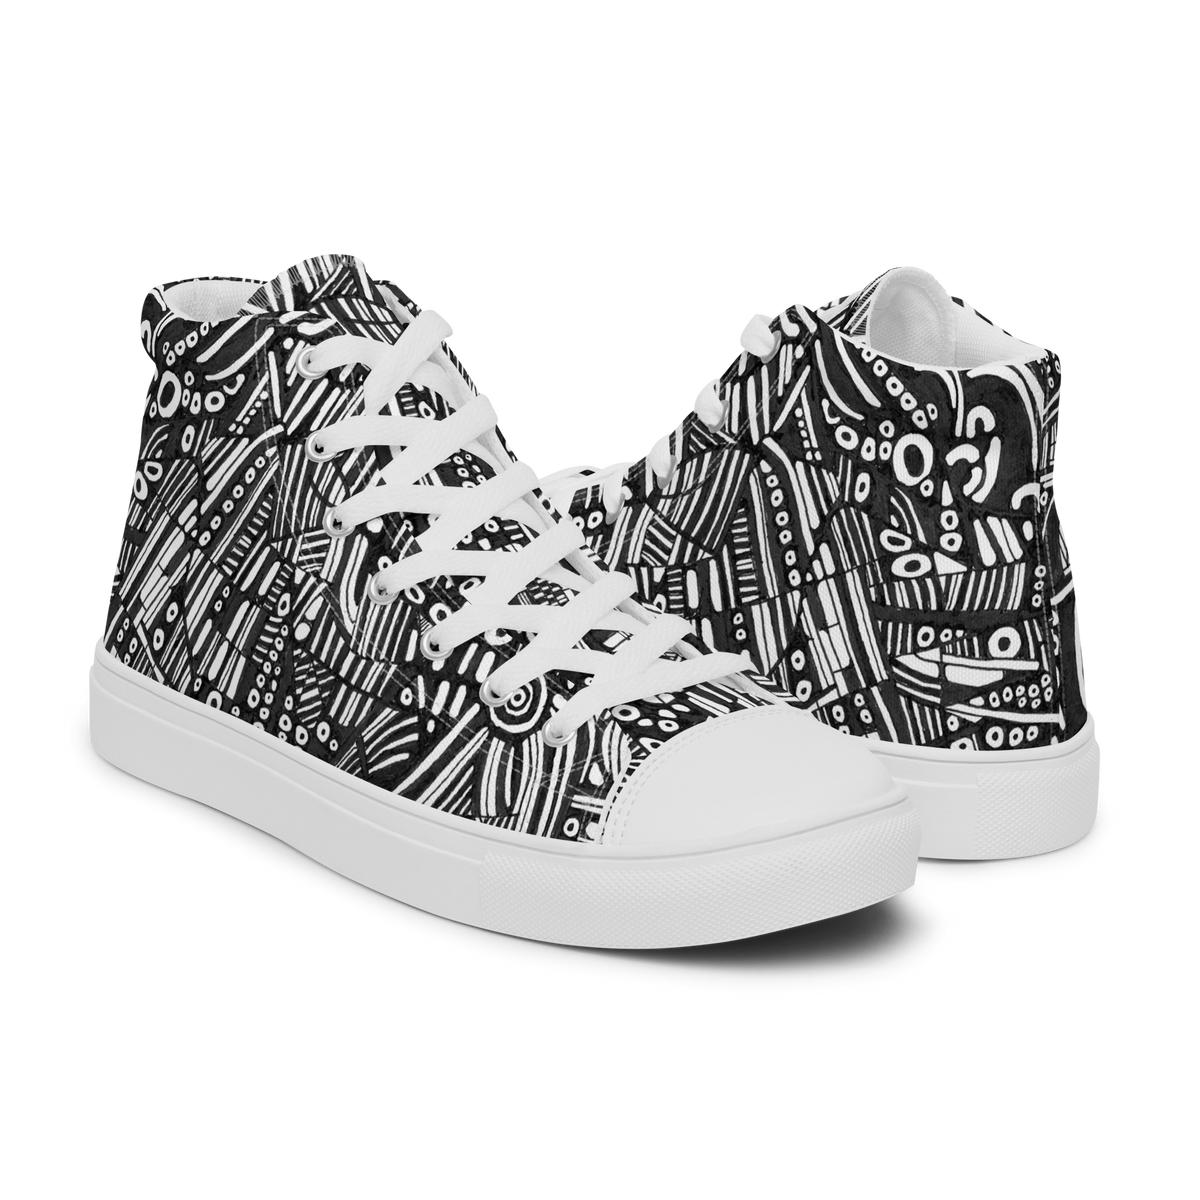 Armillary Sphere (Men’s high top canvas shoes)